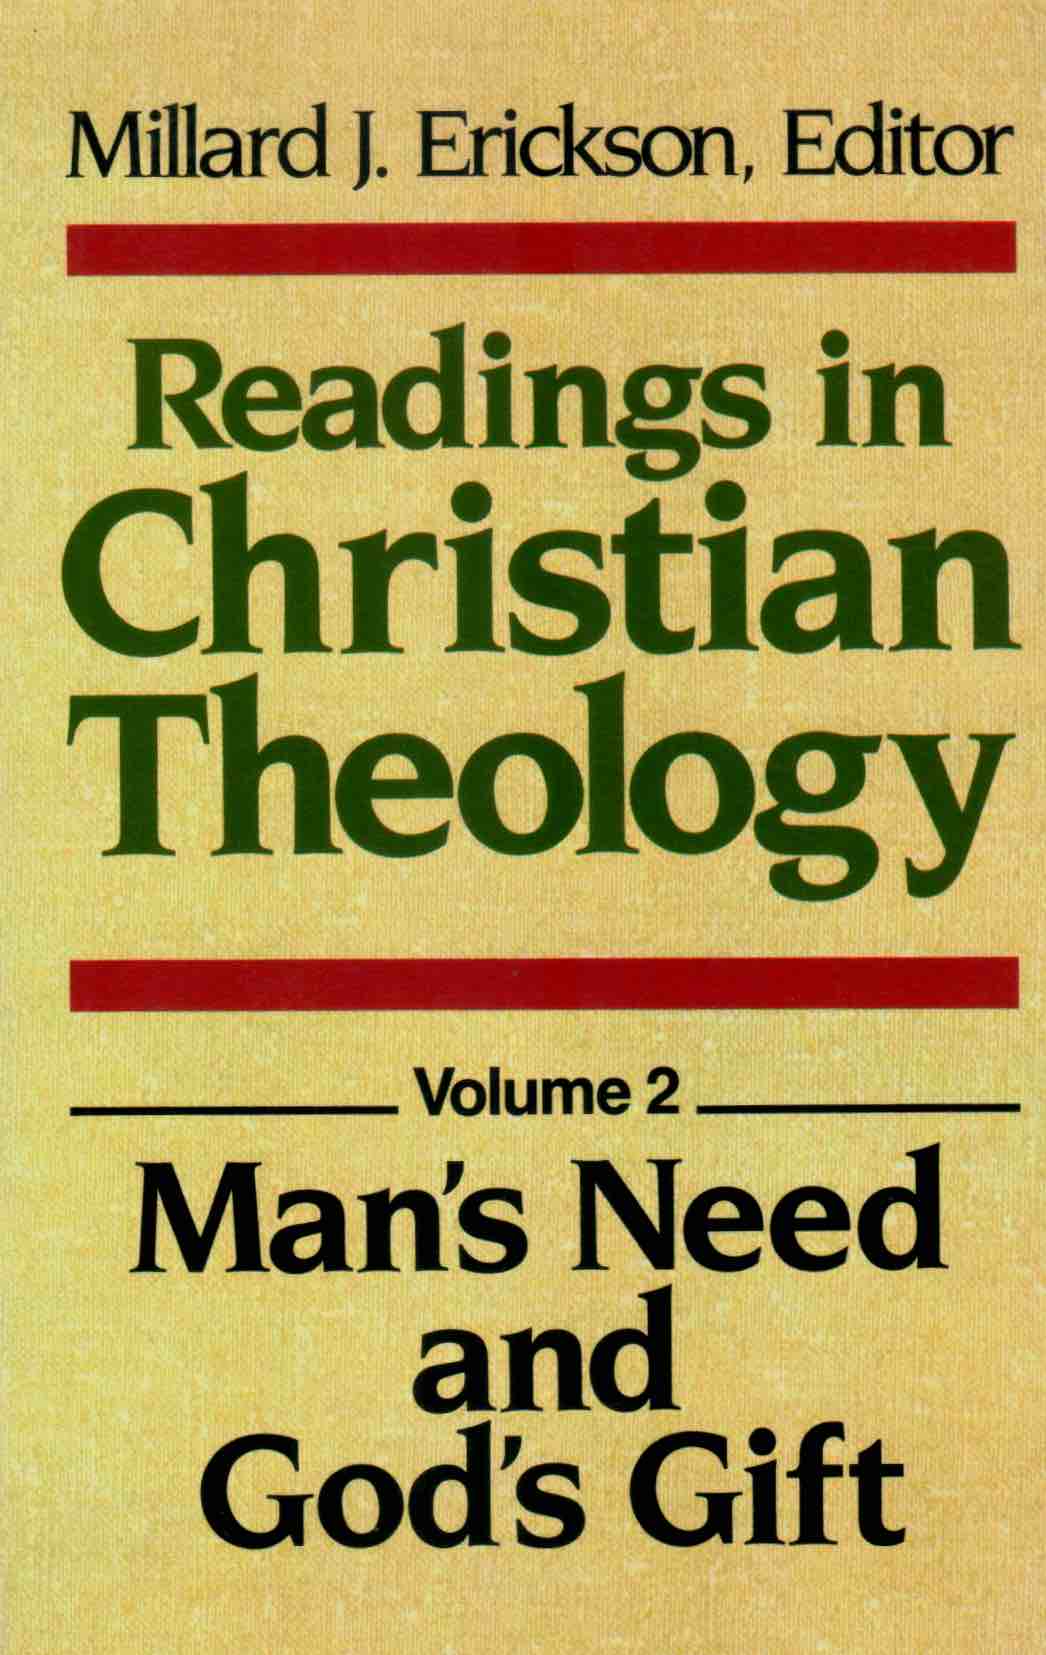 Cover of Readings in Christian Theology Vol. 2